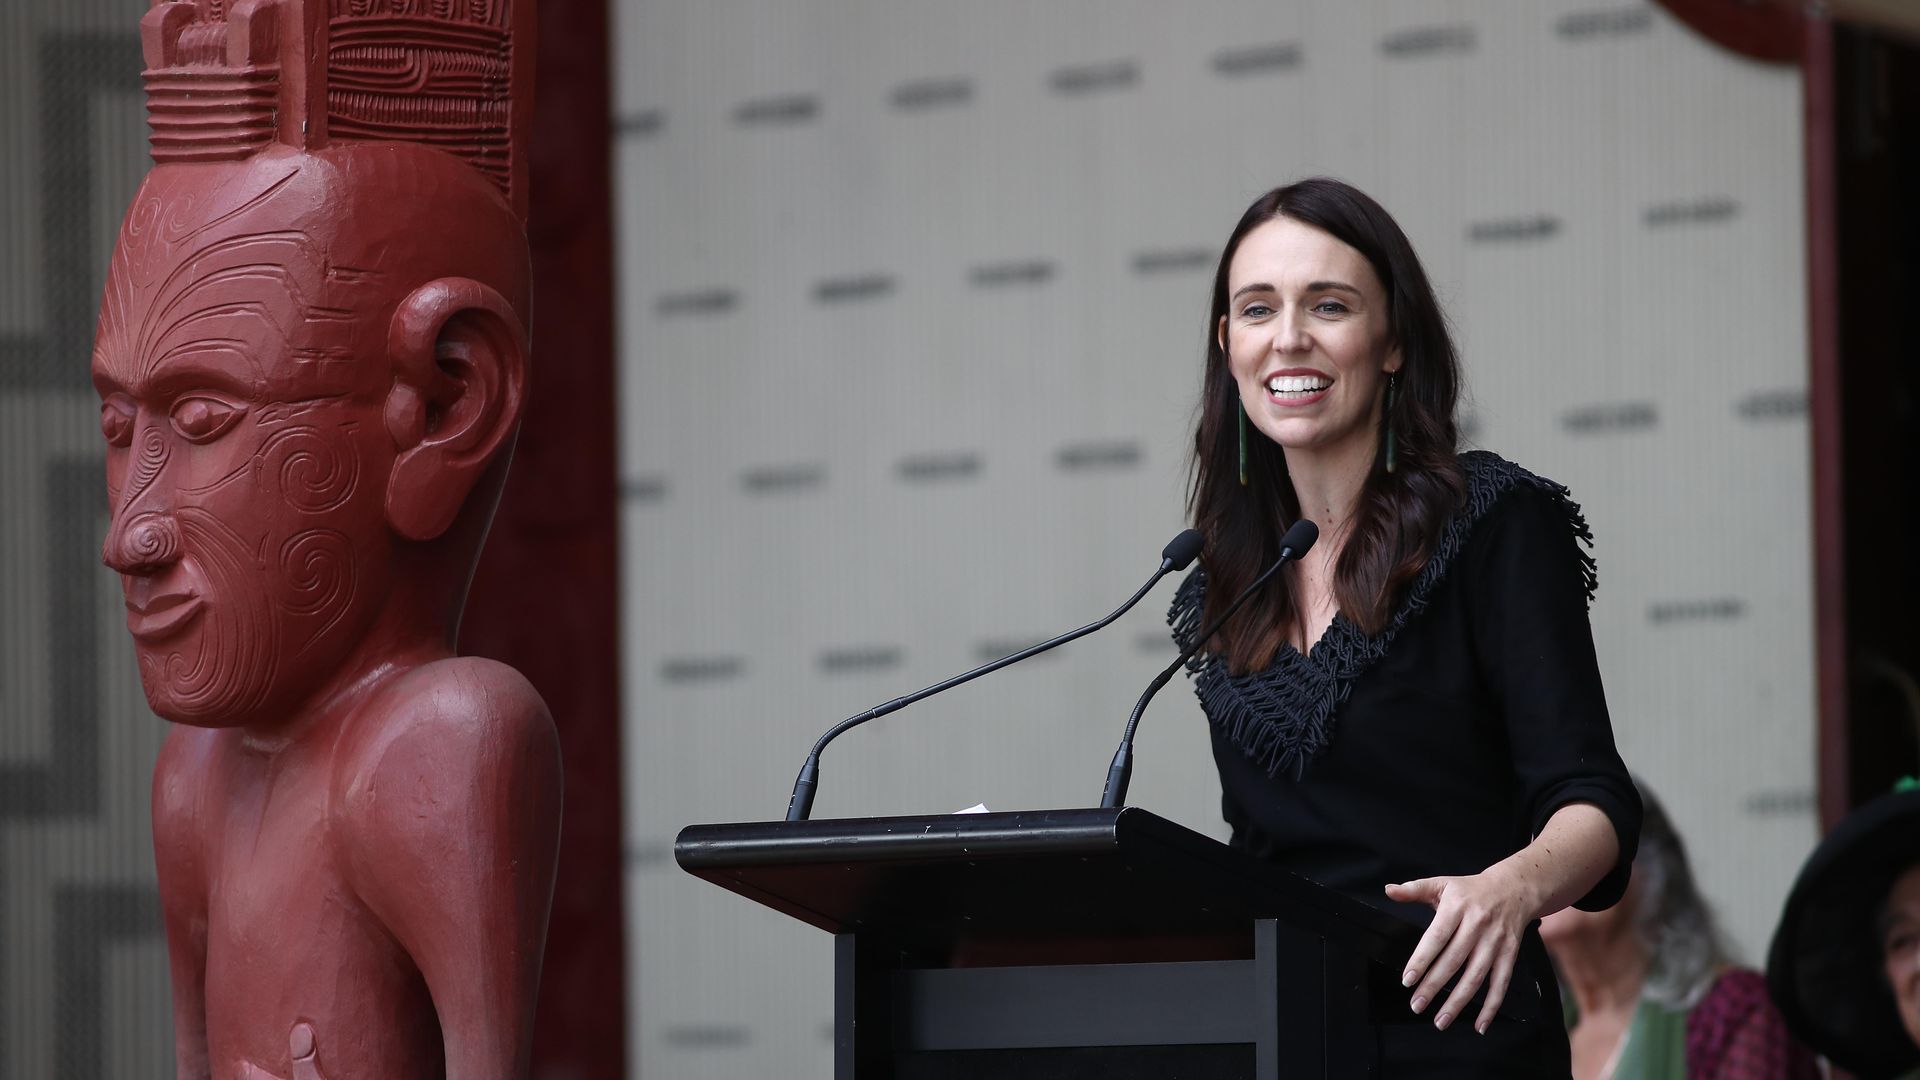 New Zealand Prime Minister Jacinda Ardern supports student climate change protesters.